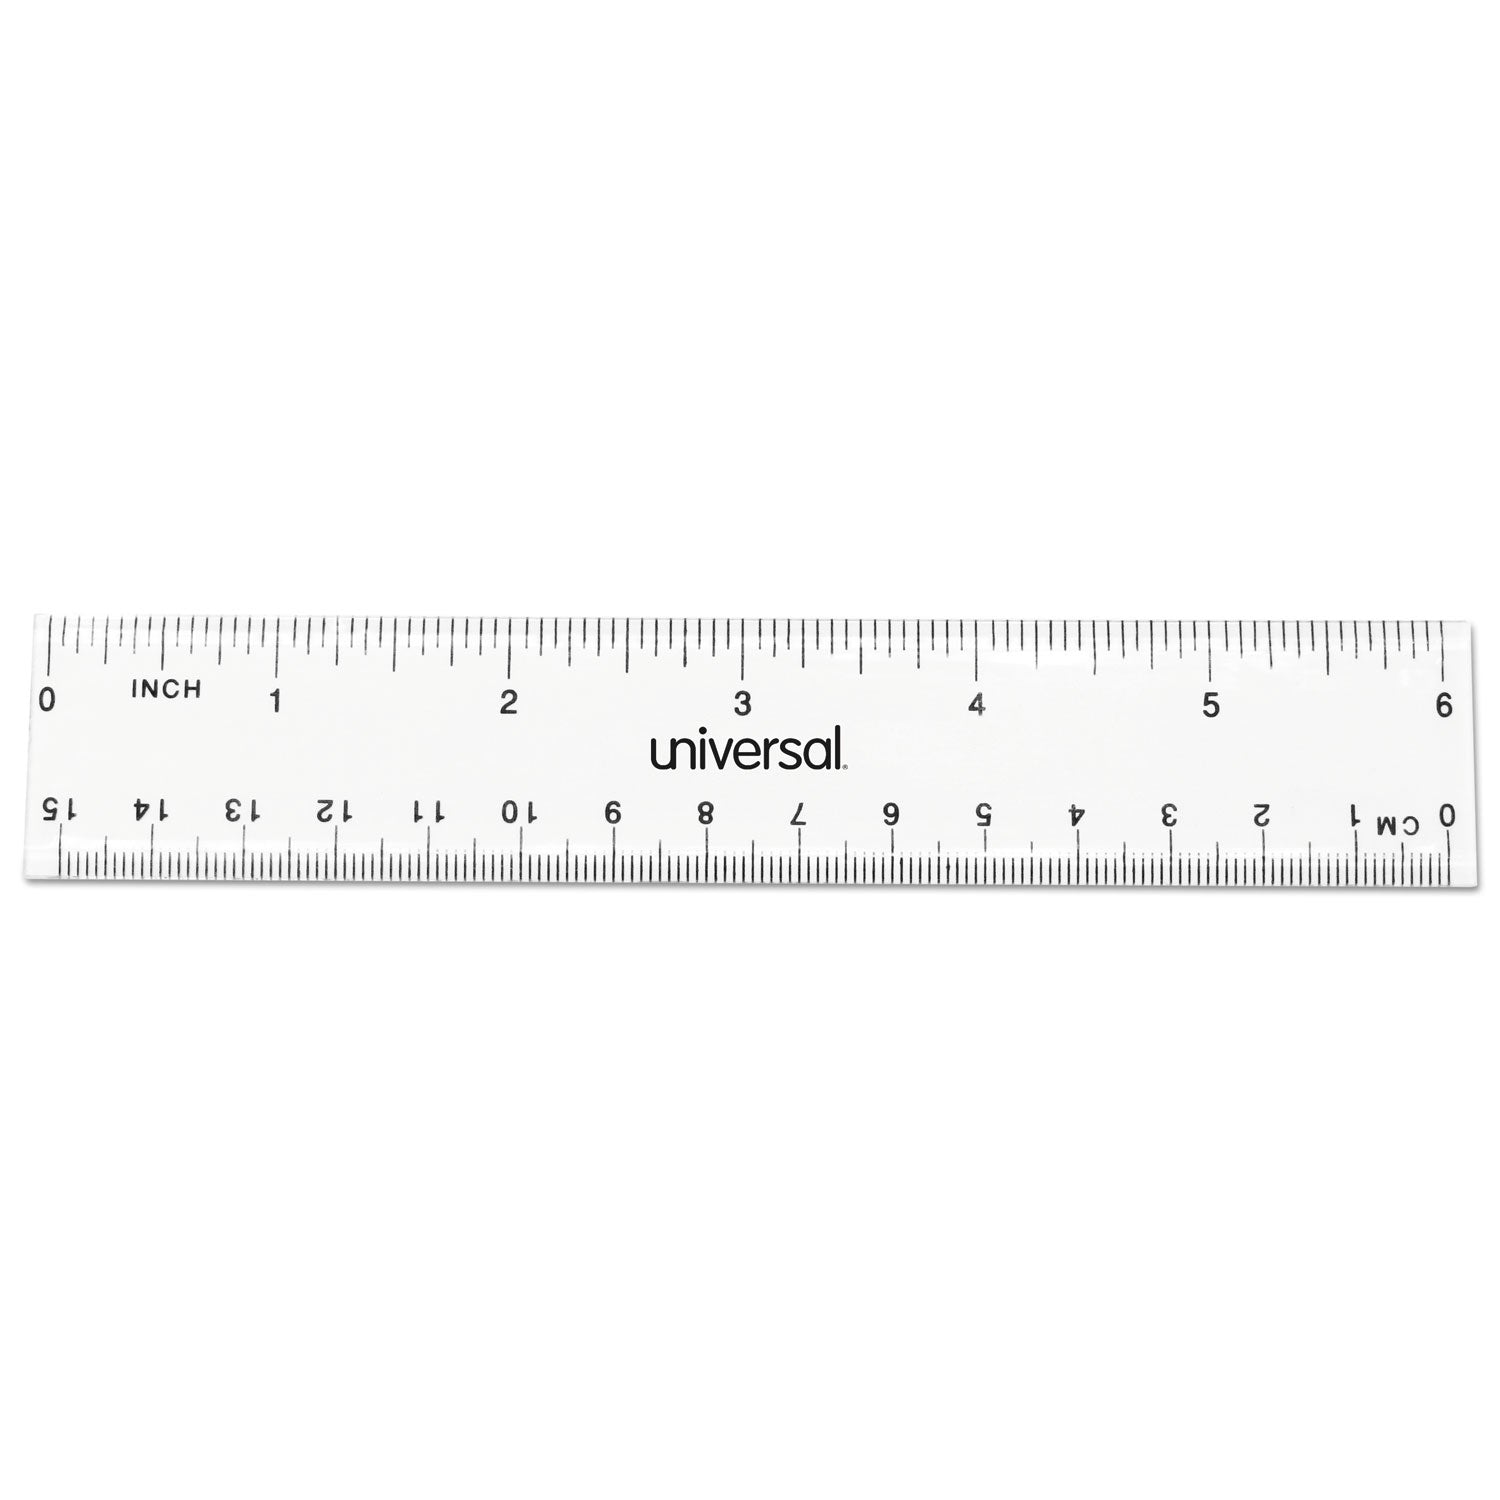 clear-plastic-ruler-standard-metric-6-long-clear-2-pack_unv59025 - 1